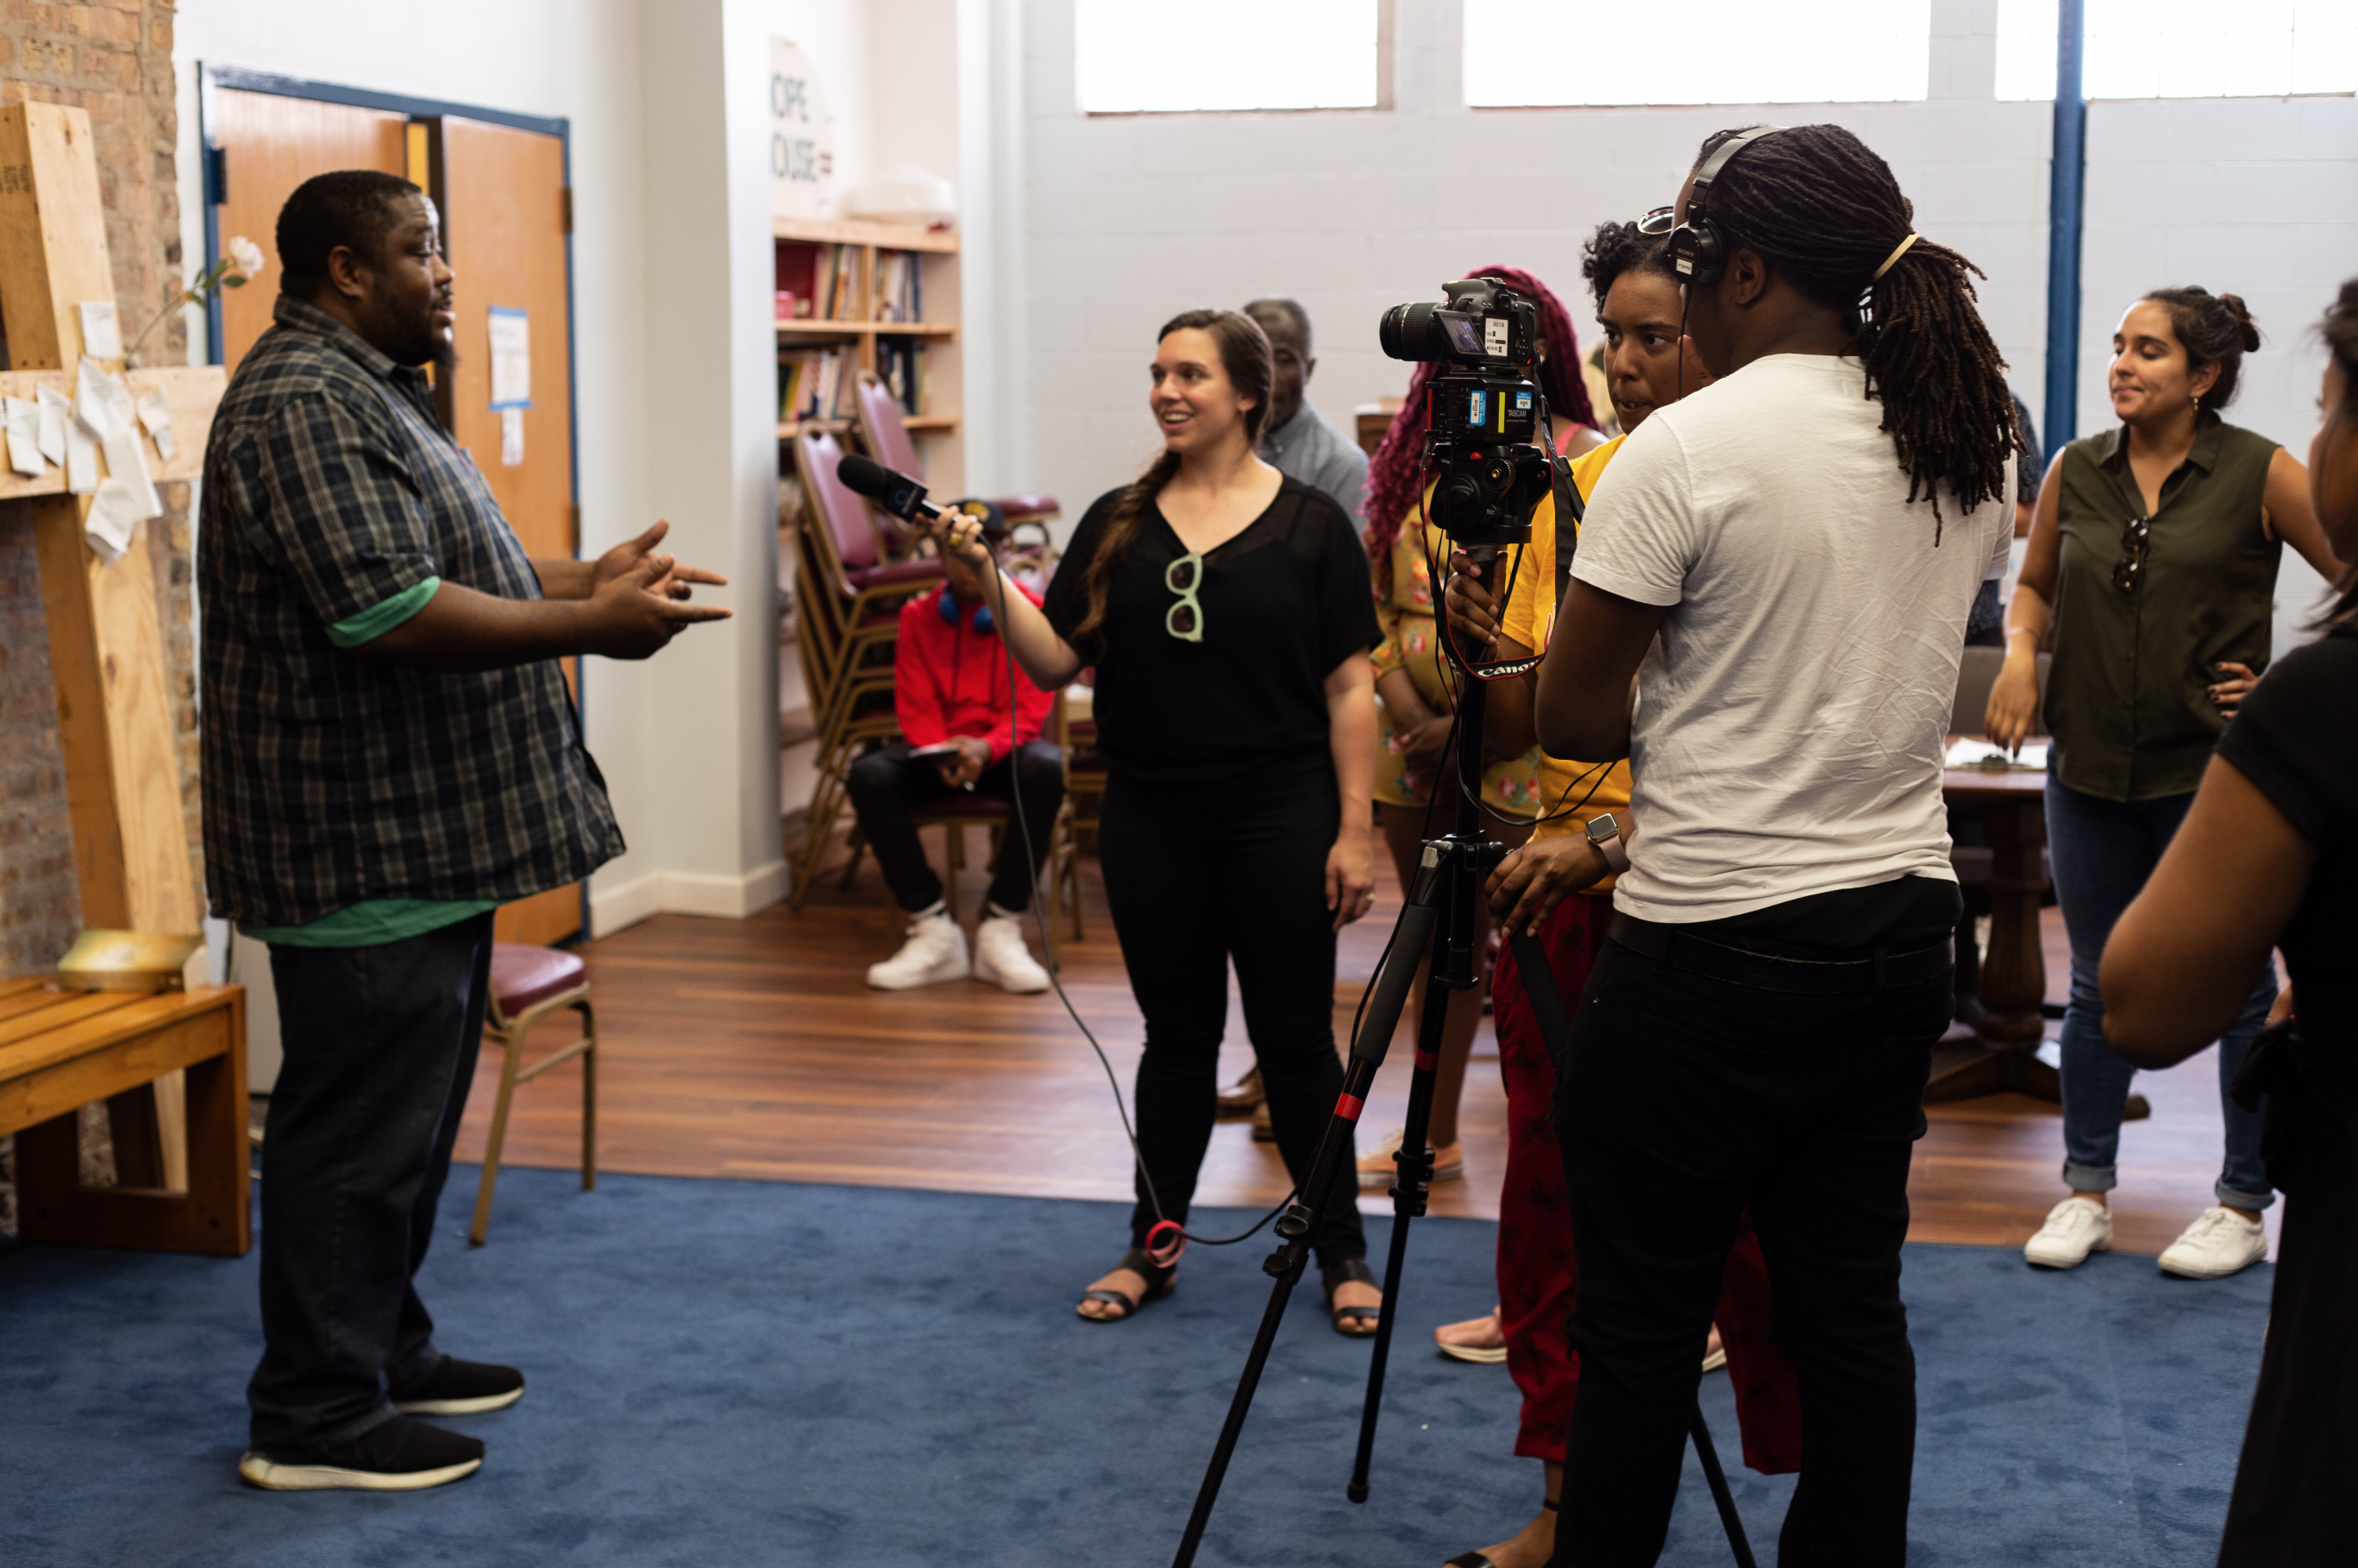 A student interviews a man at Hope House, a transitional home in Chicago, during Free Spirit Media's News West summer program. Image by Claire Seaton. United States, 2019.